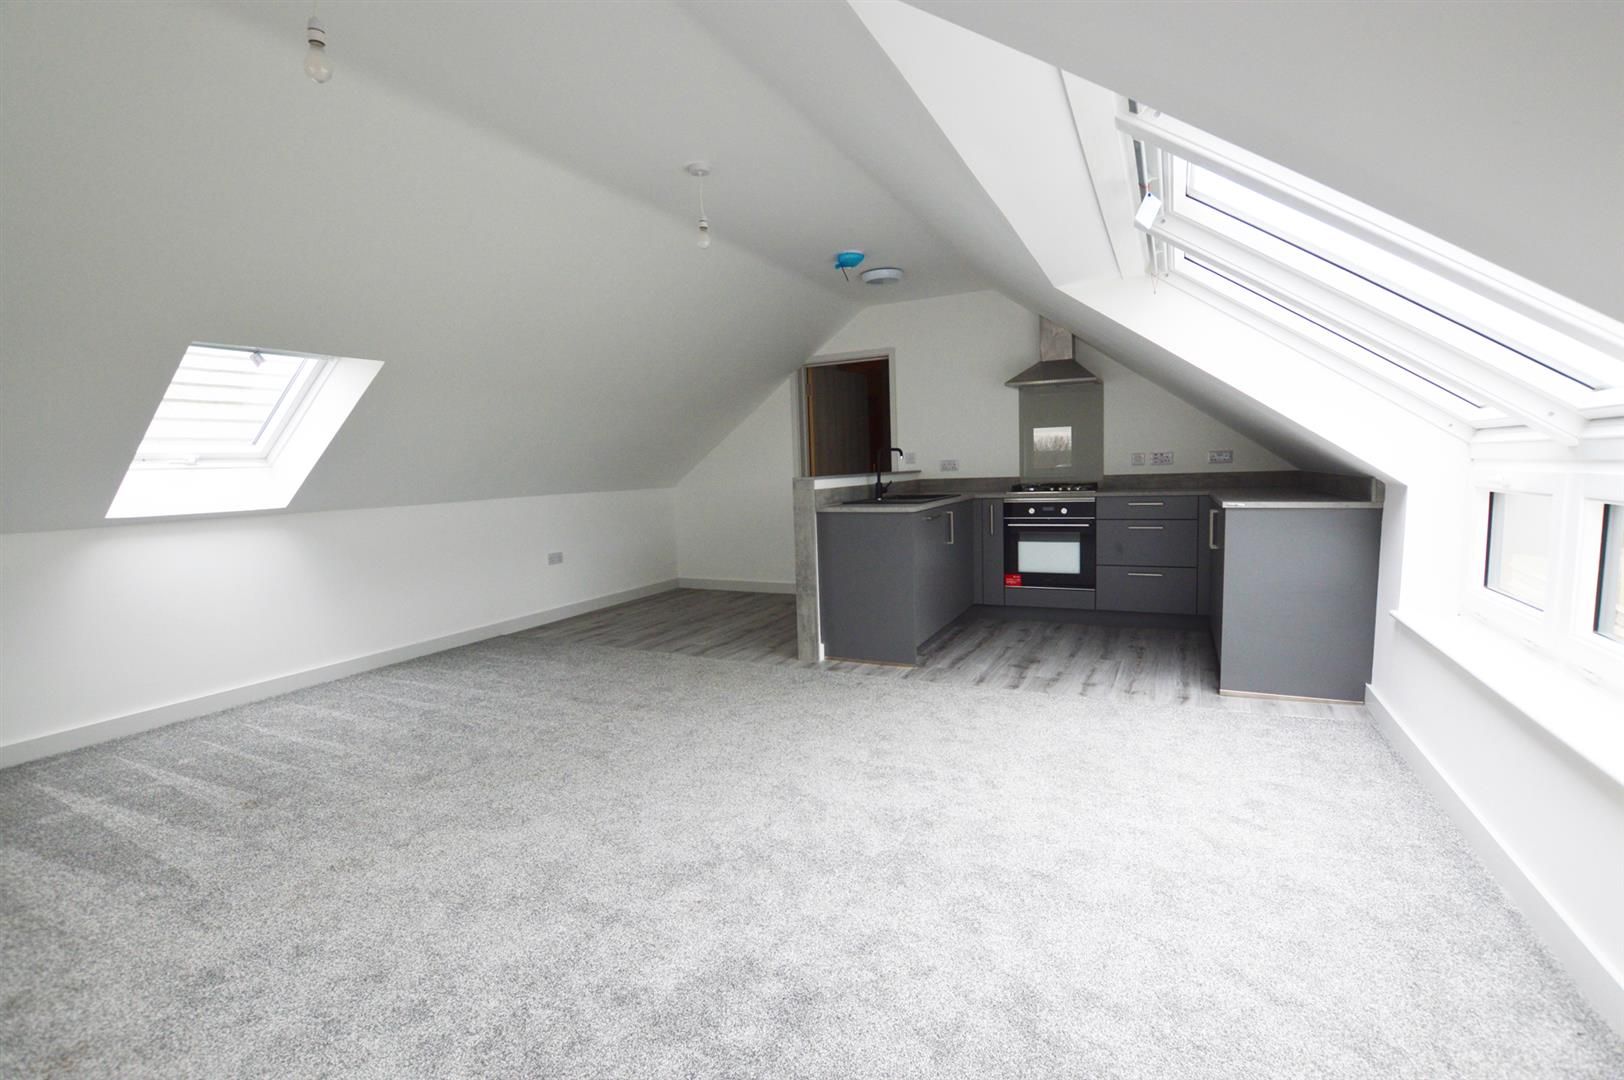 1 bed apartment for sale in Leominster 2